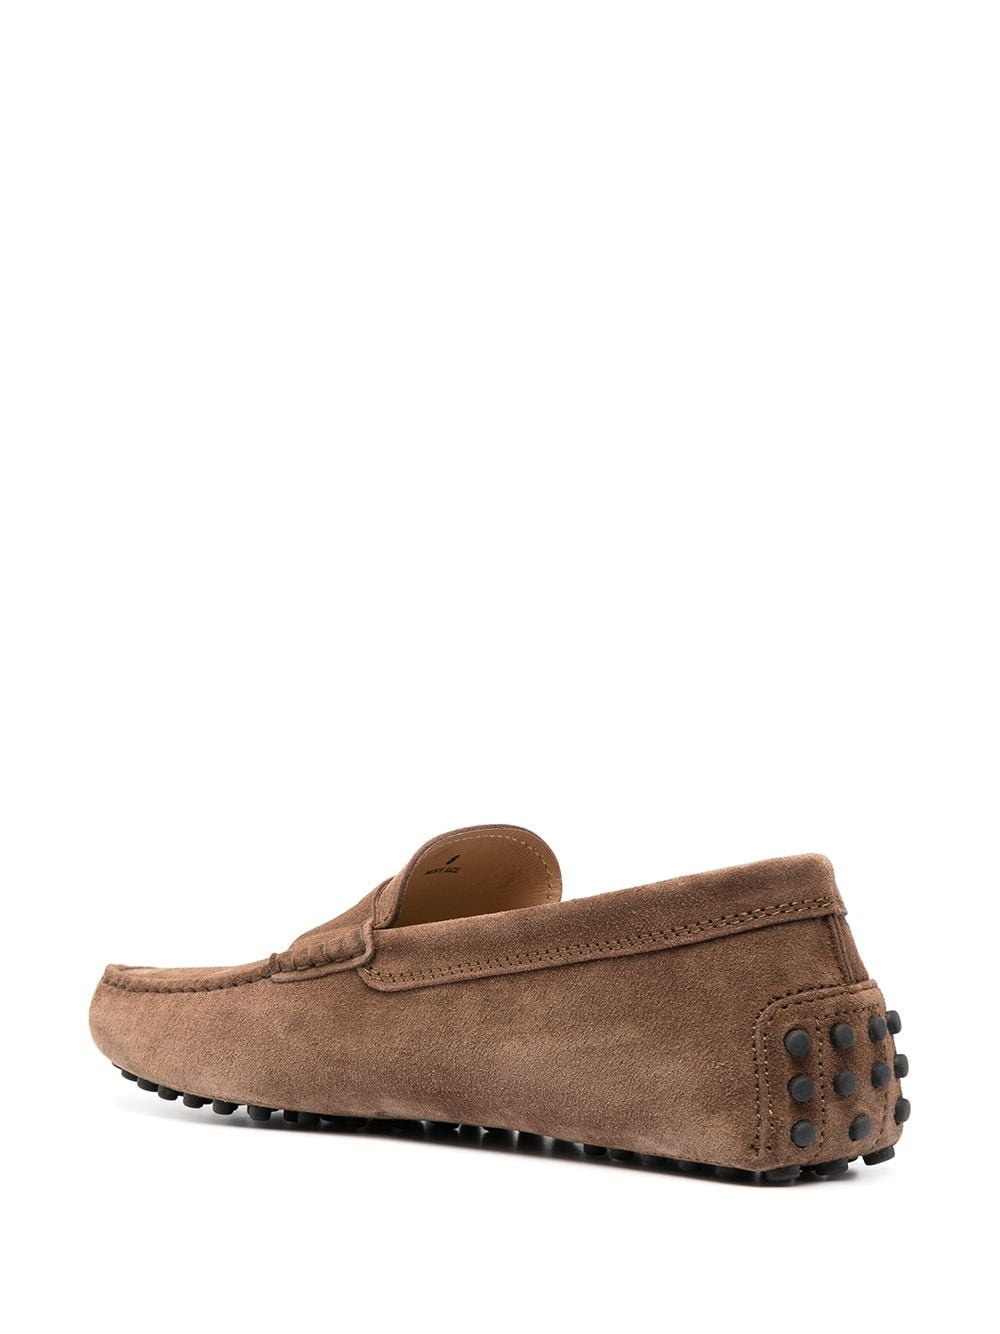 Brown suede Gommino driving loafers